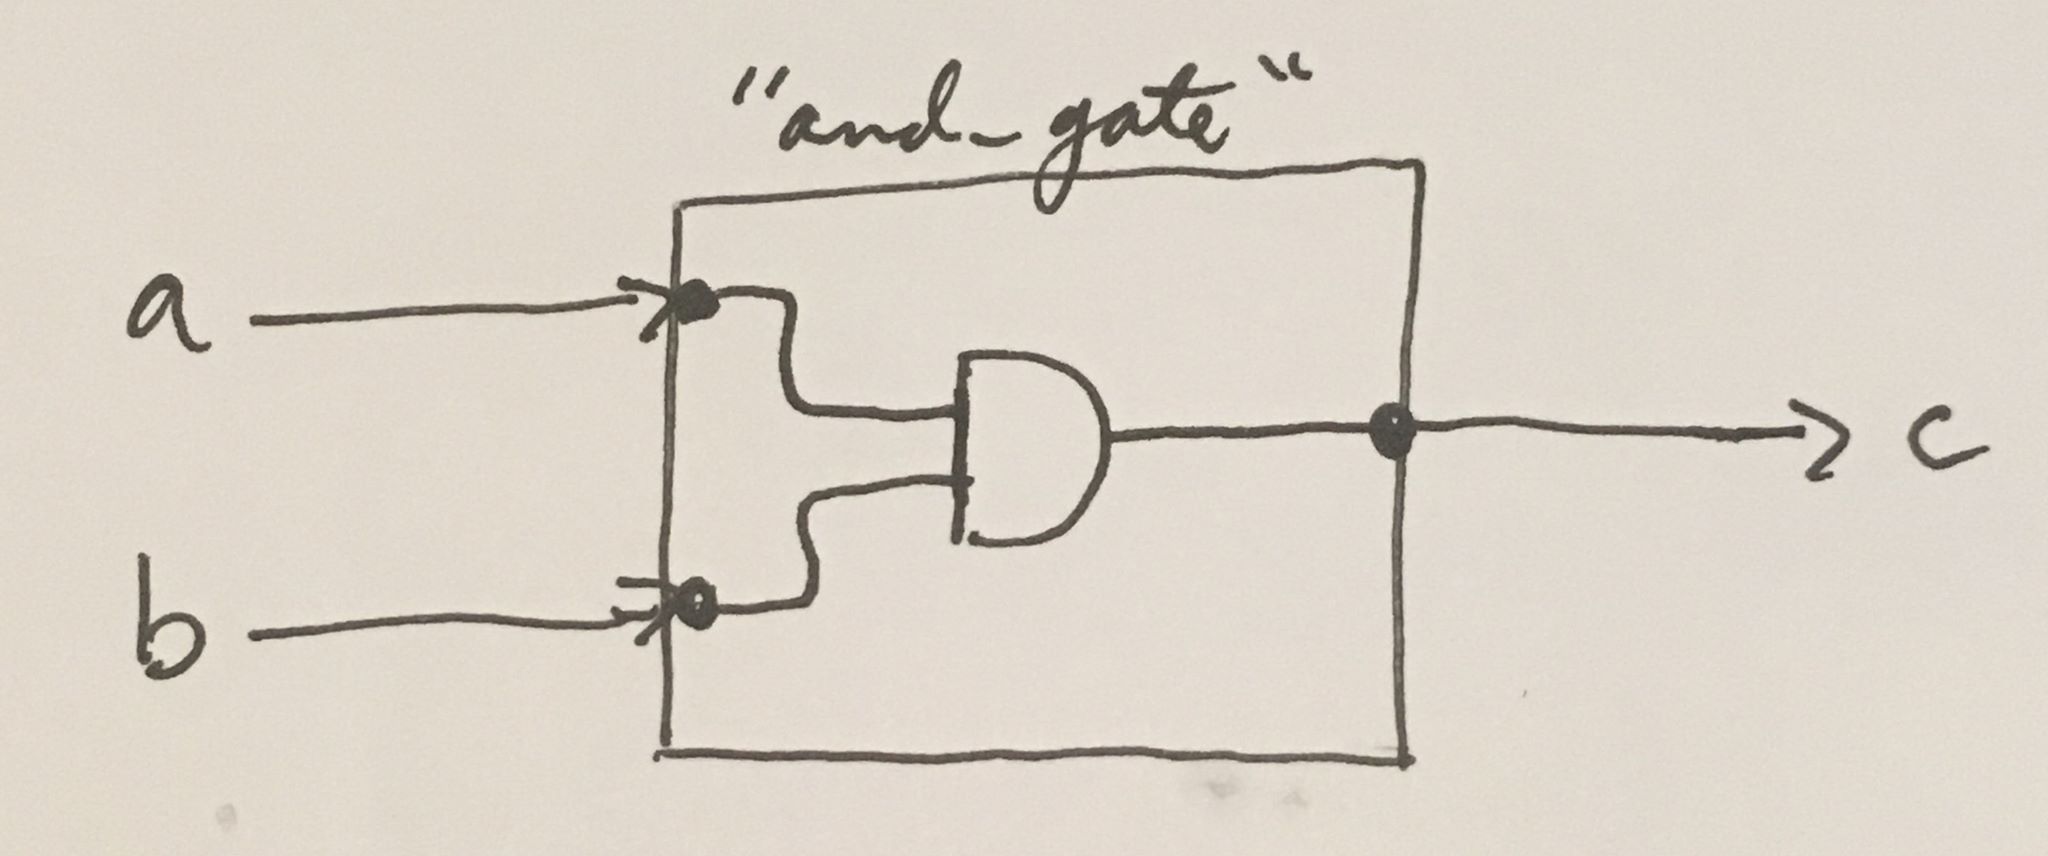 filled-in diagram of and gate module